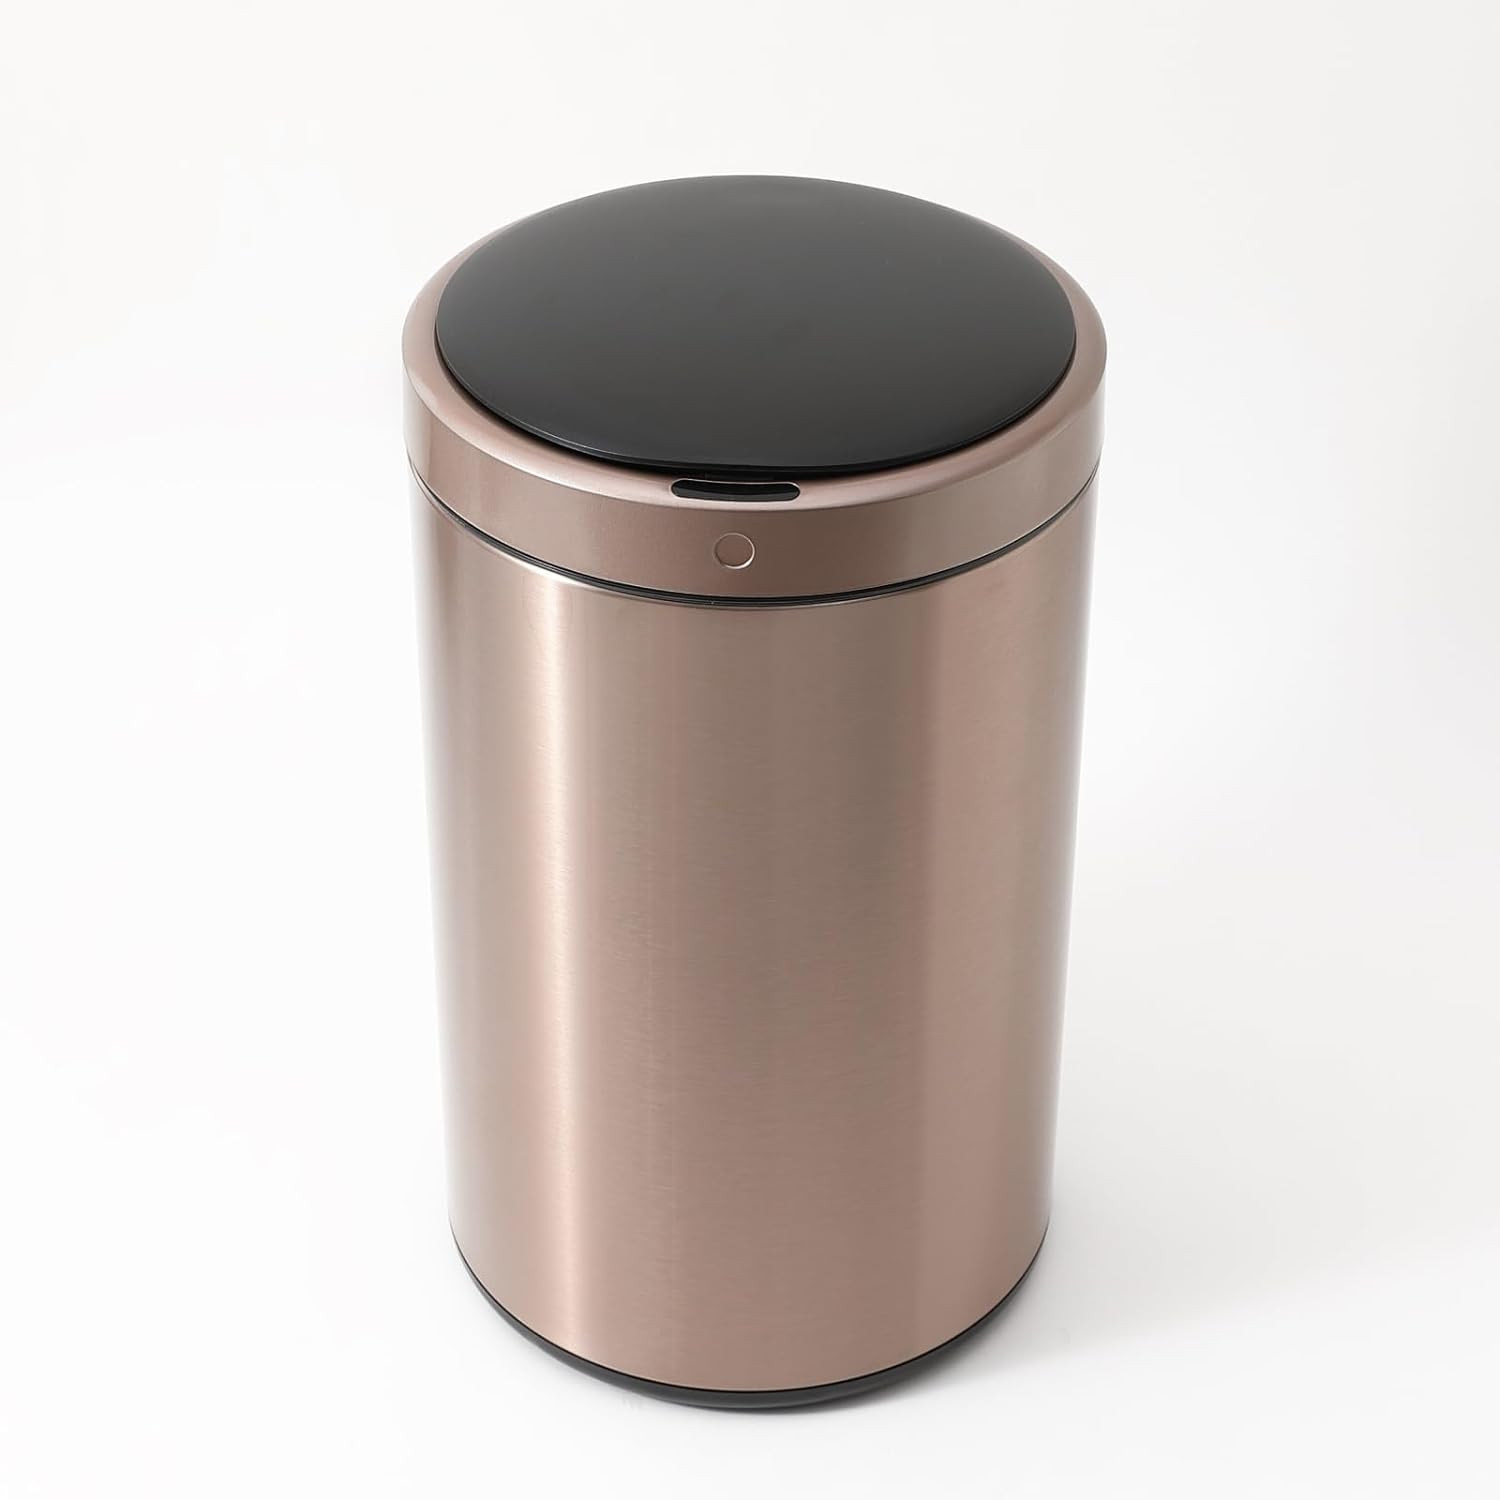 Kuber Industries Sensor Dustbin | Round Sensor Dustbin | Touchless Trash Can | Smart Dustbin for Bedroom-Office-Living Room | Automatic Garbage Can | HN-ZY-RG-12L | Rose Gold